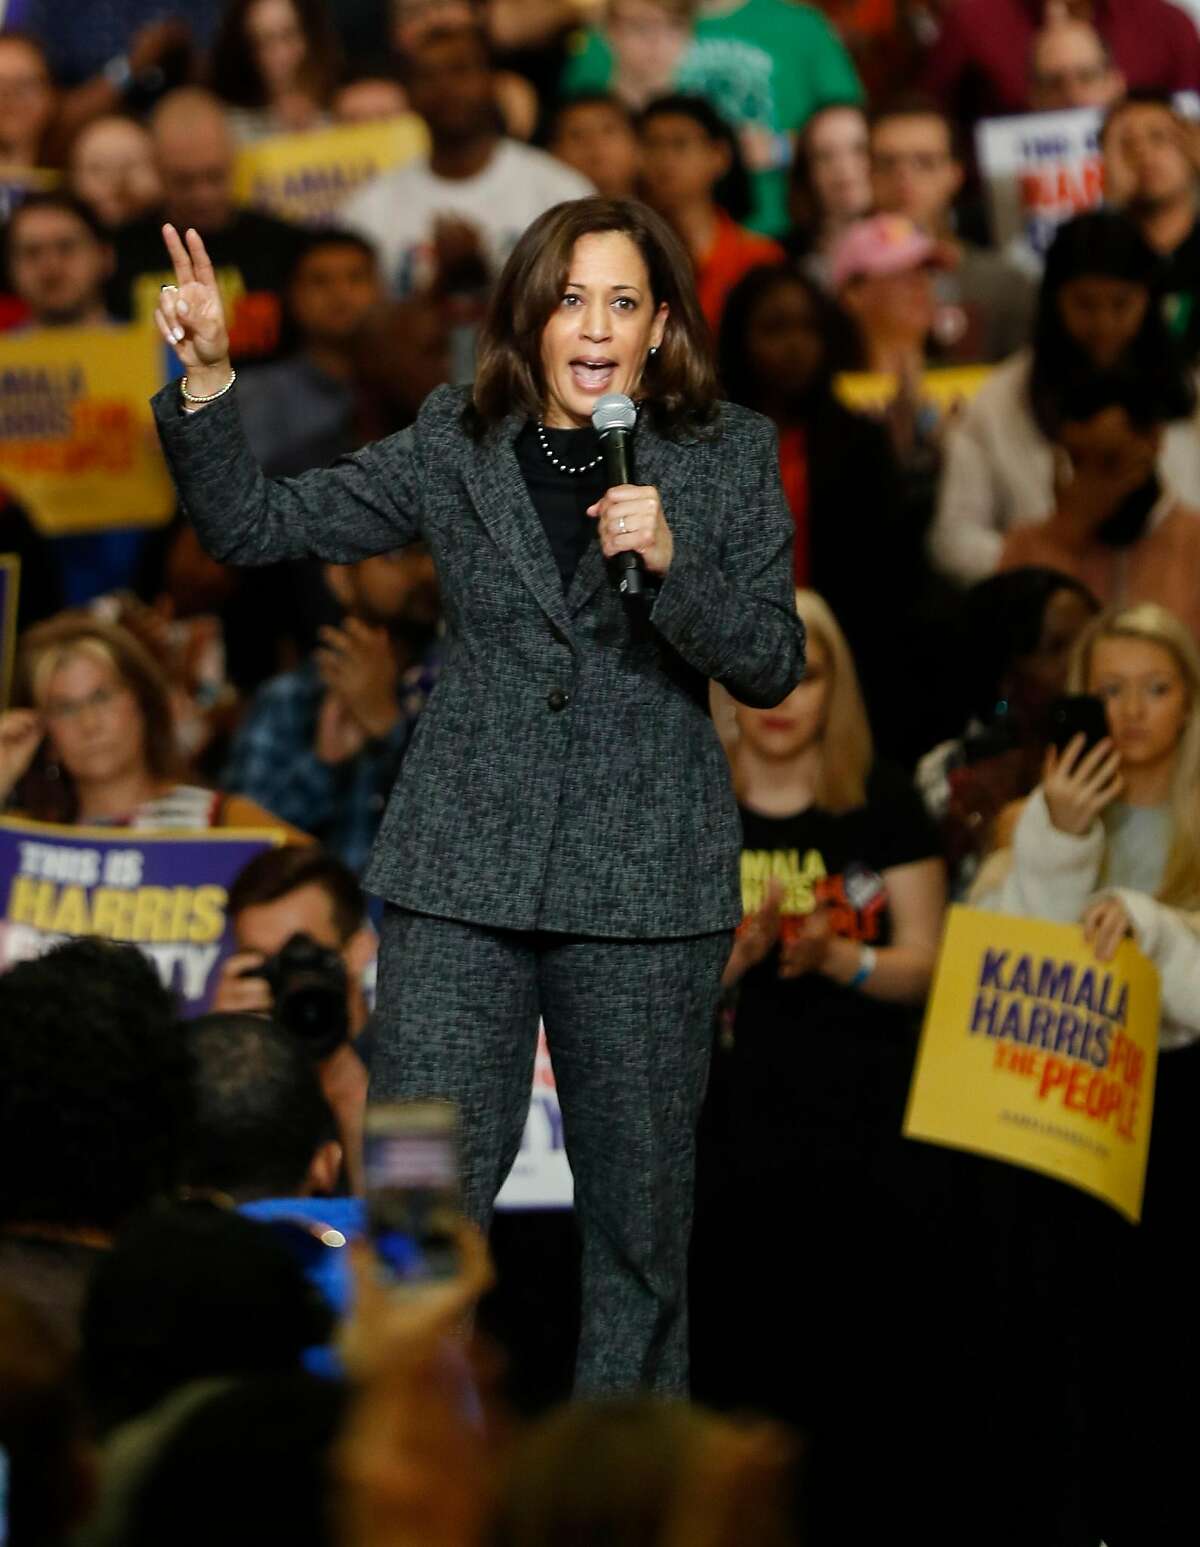 Kamala Harris speaks during her rally Saturday at Texas Southern University's Recreational Center,Saturday, March 23, 2019, in Houston.